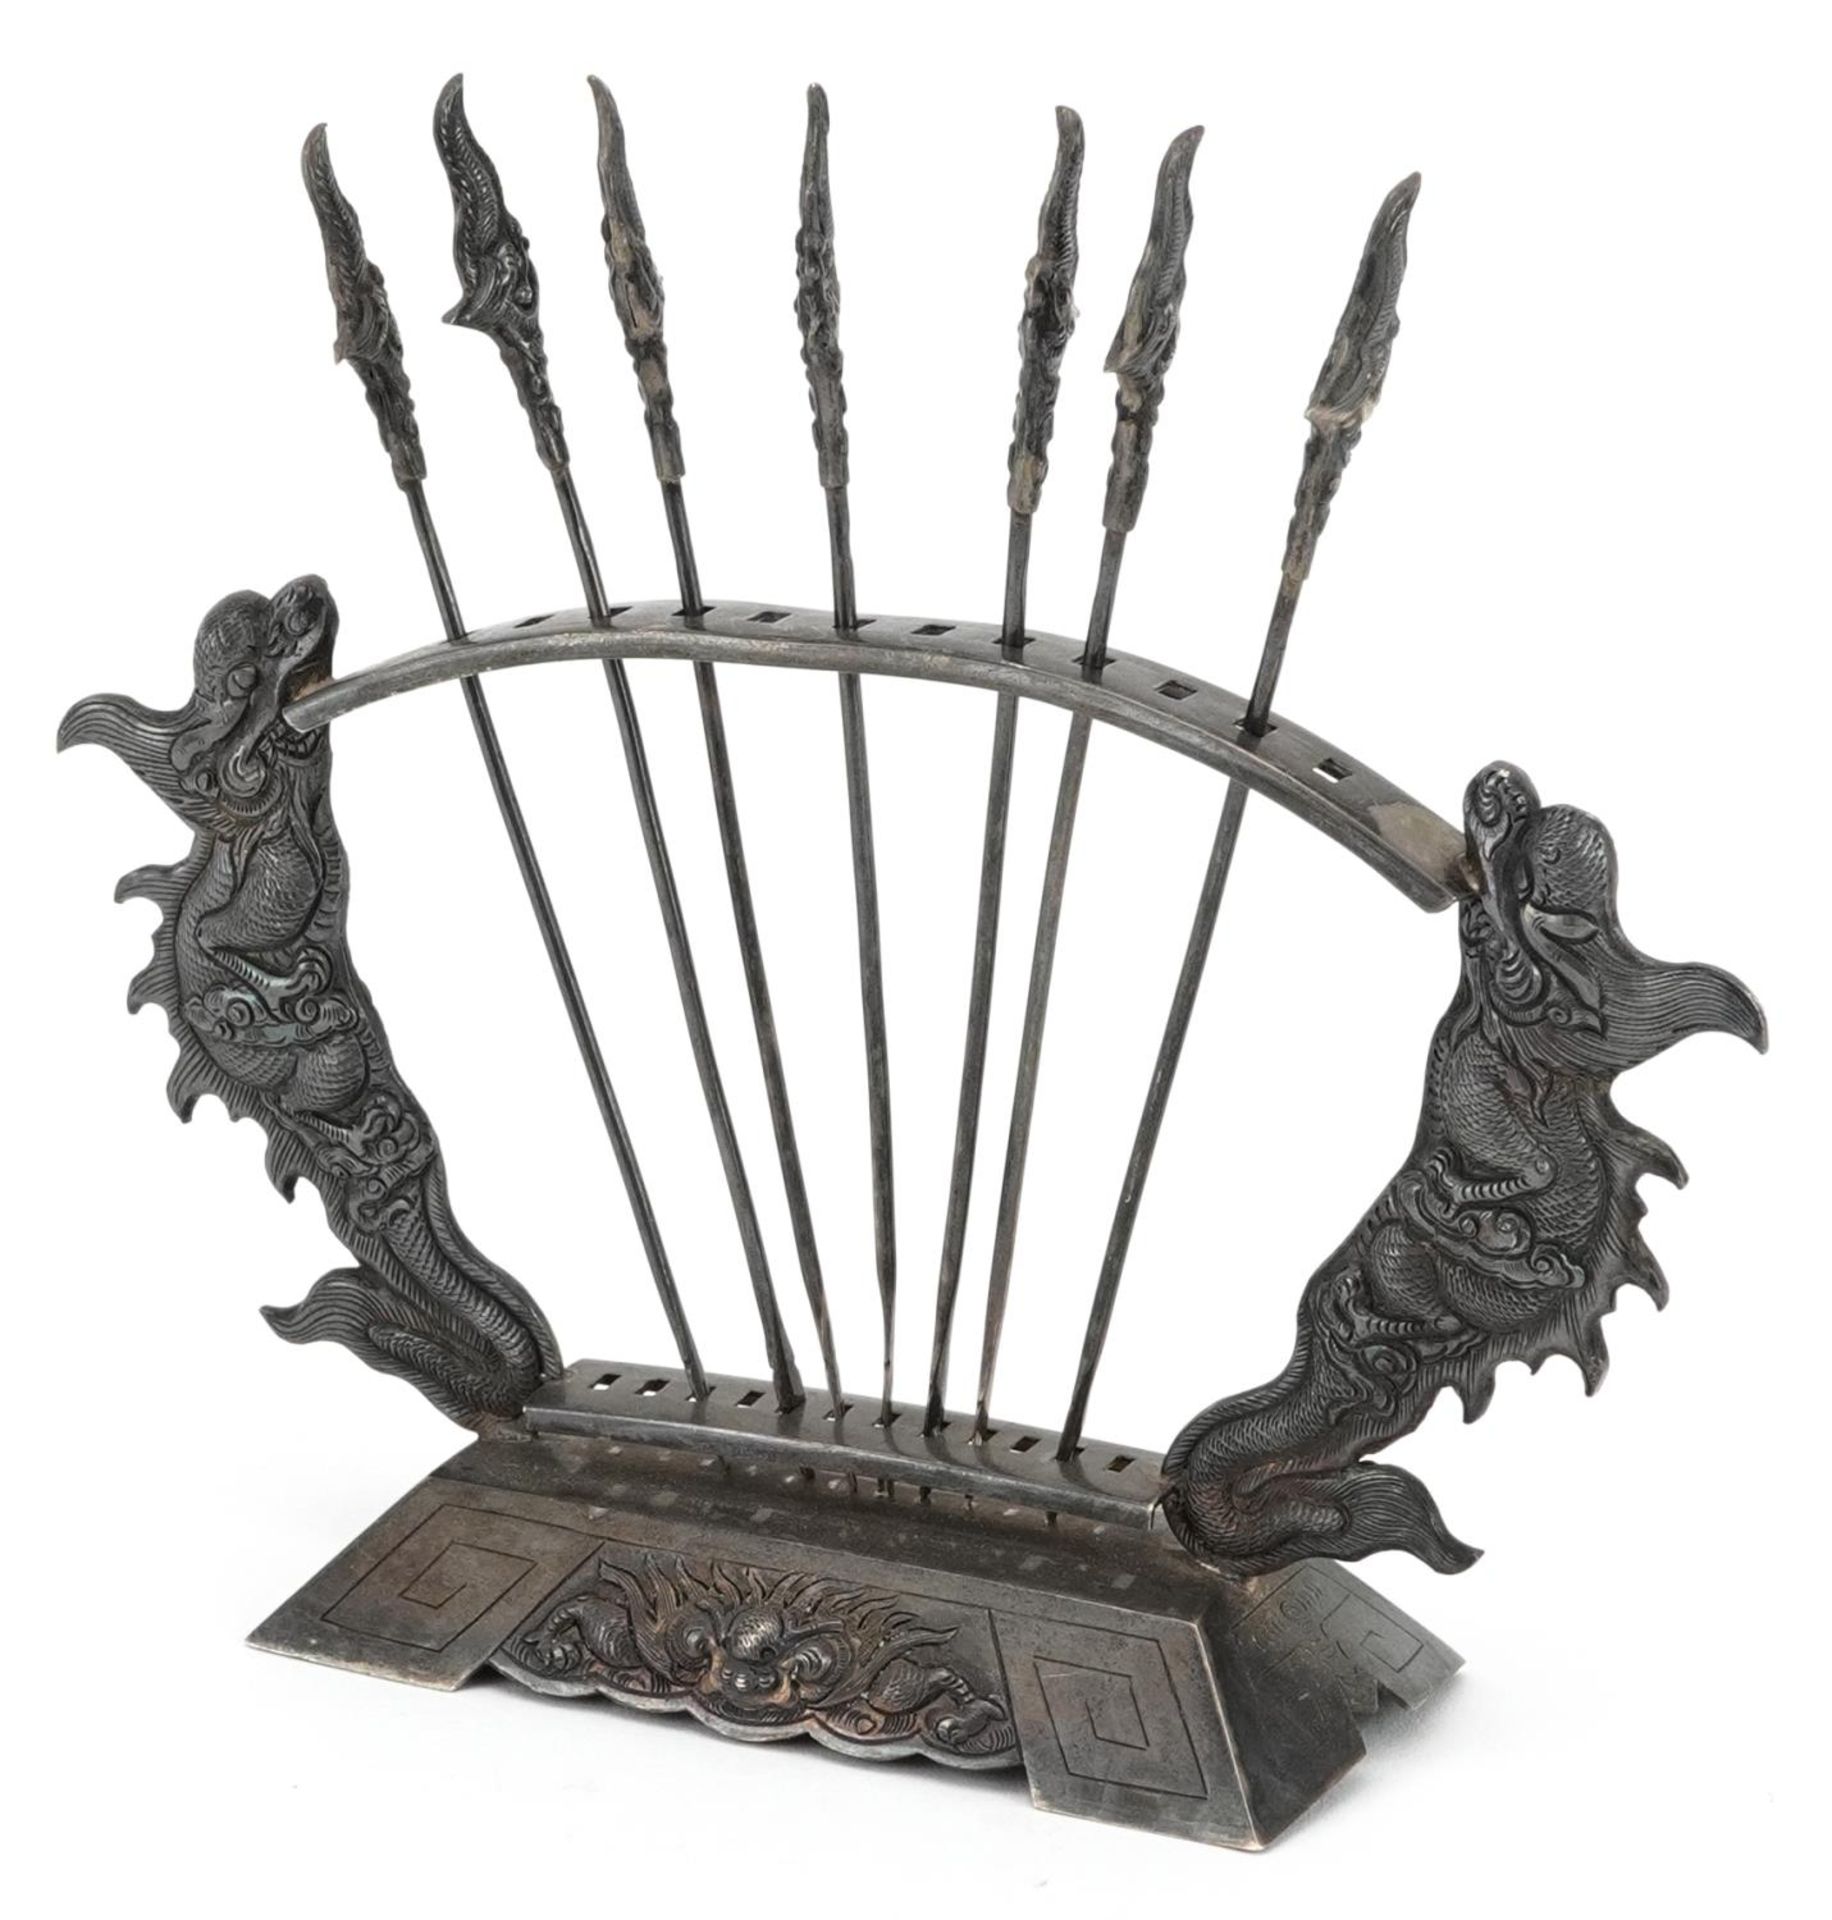 Vietnamese silver dragon cocktail stand, 12cm high x 13cm wide, 89.0g : For further information on